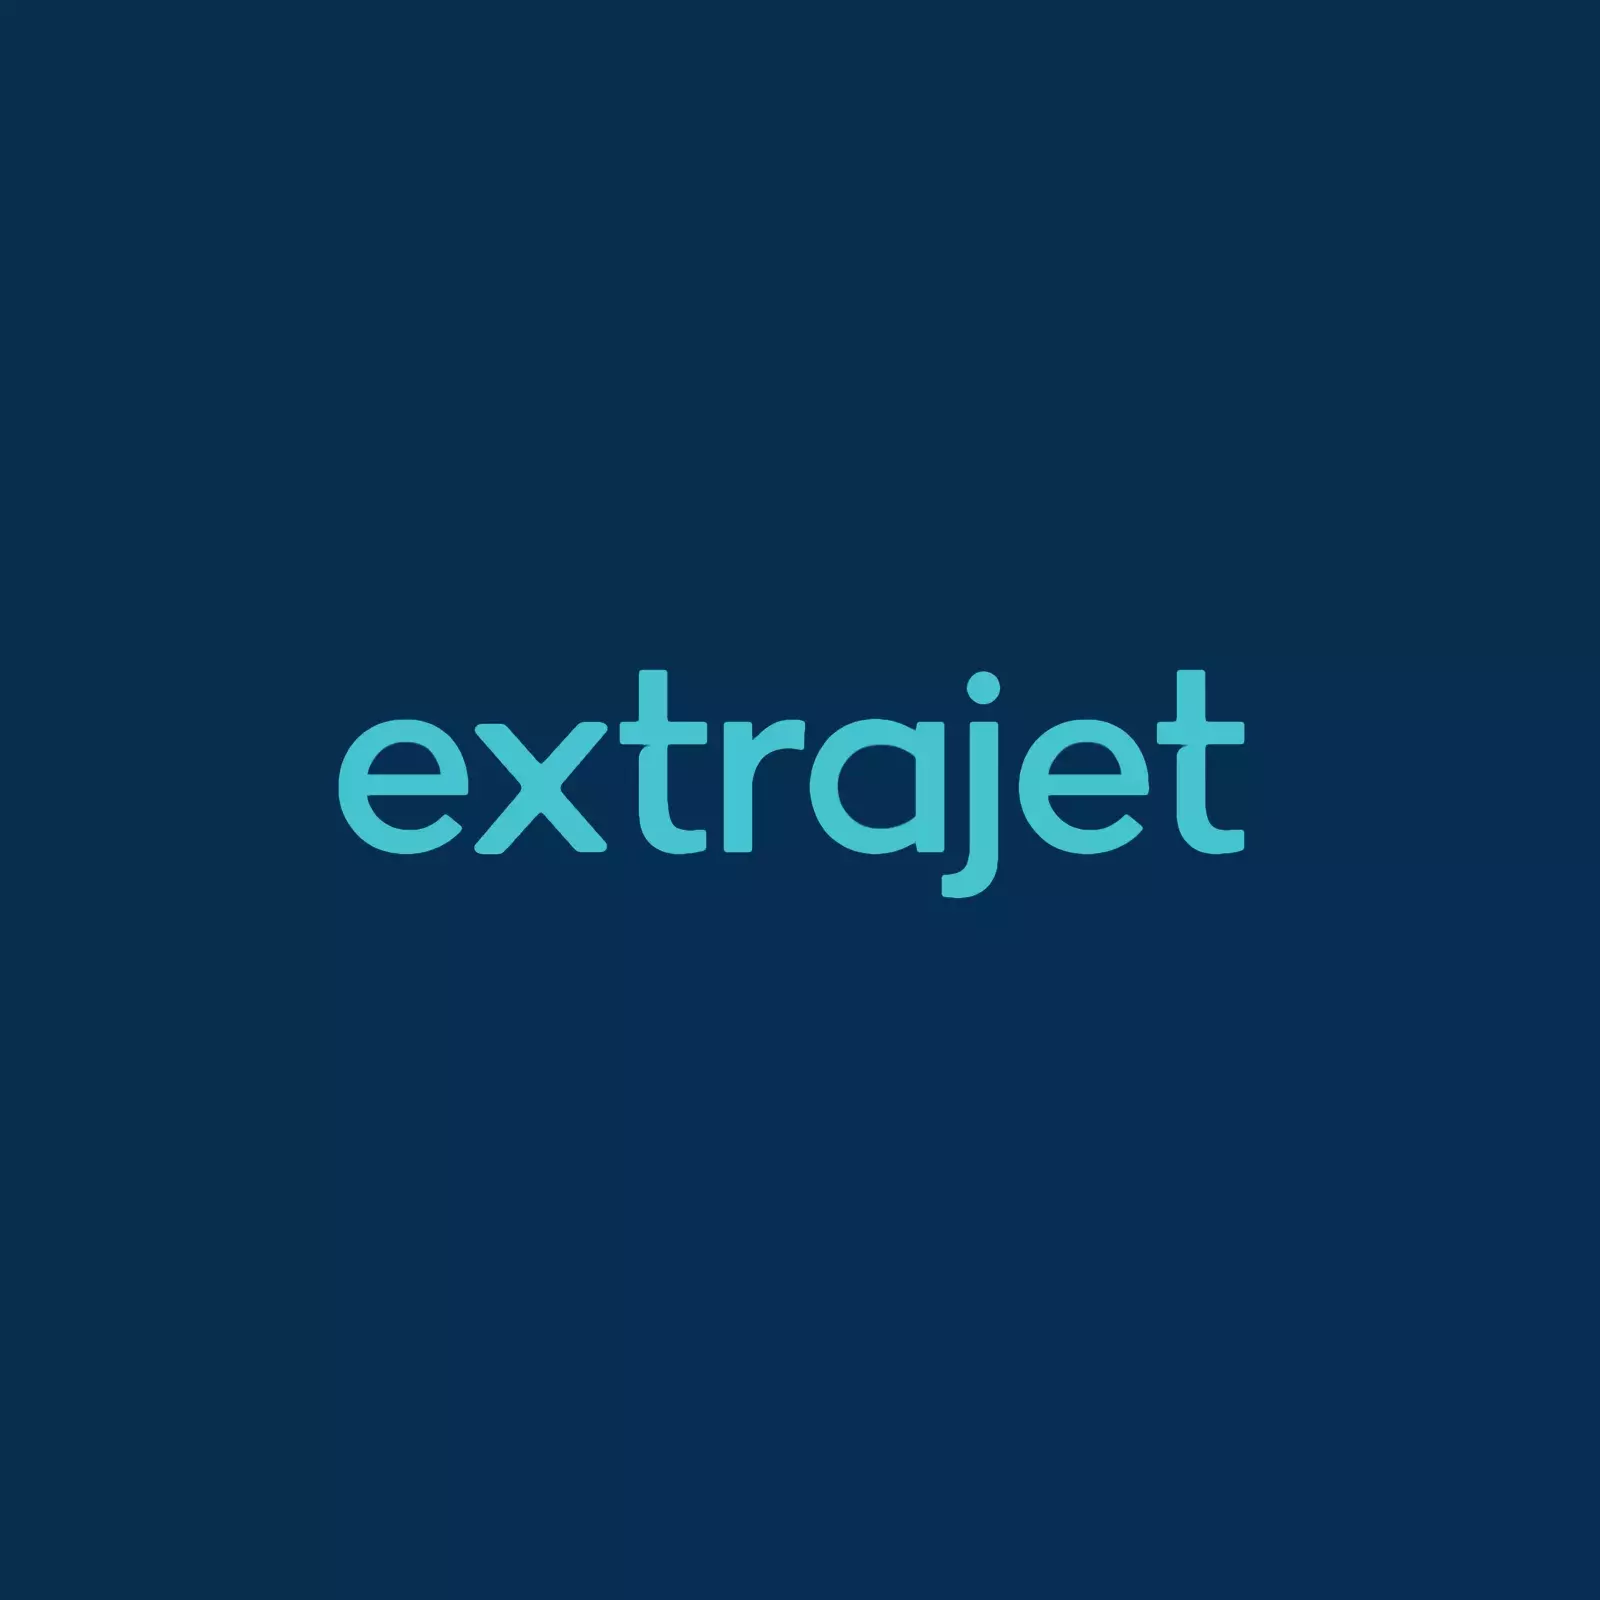 Brand and visual identity for Extrajet Airline